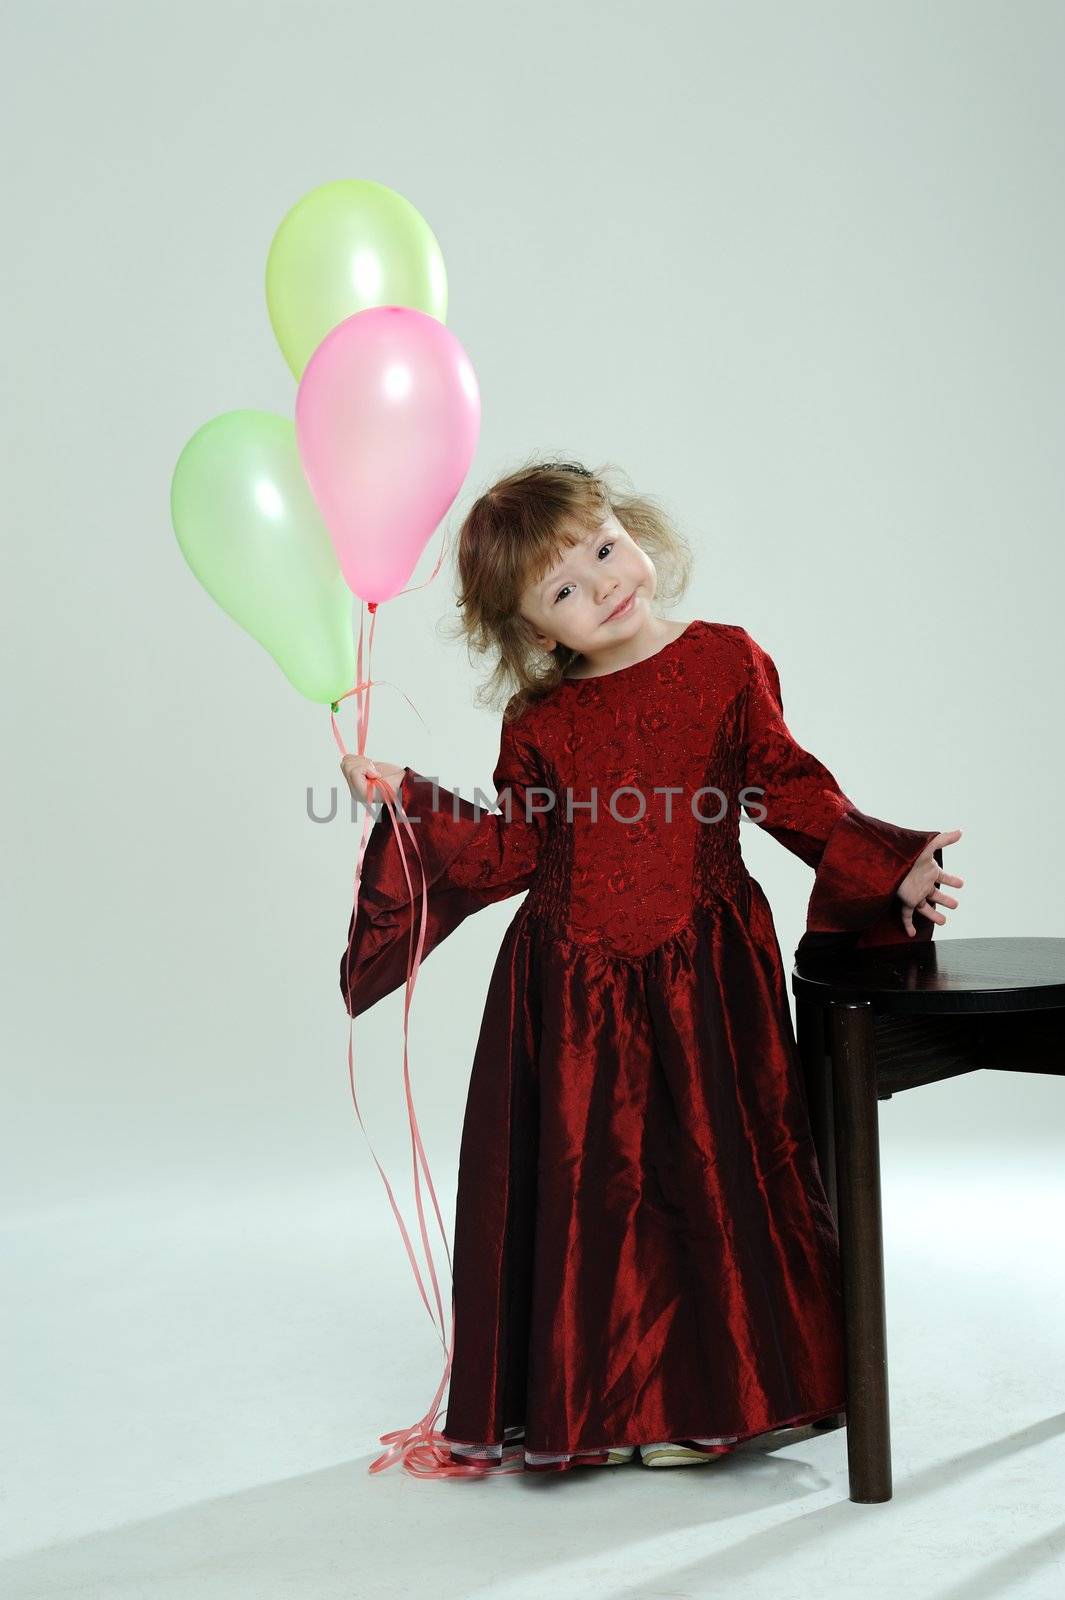 An image of a little girl in red dress with balloons